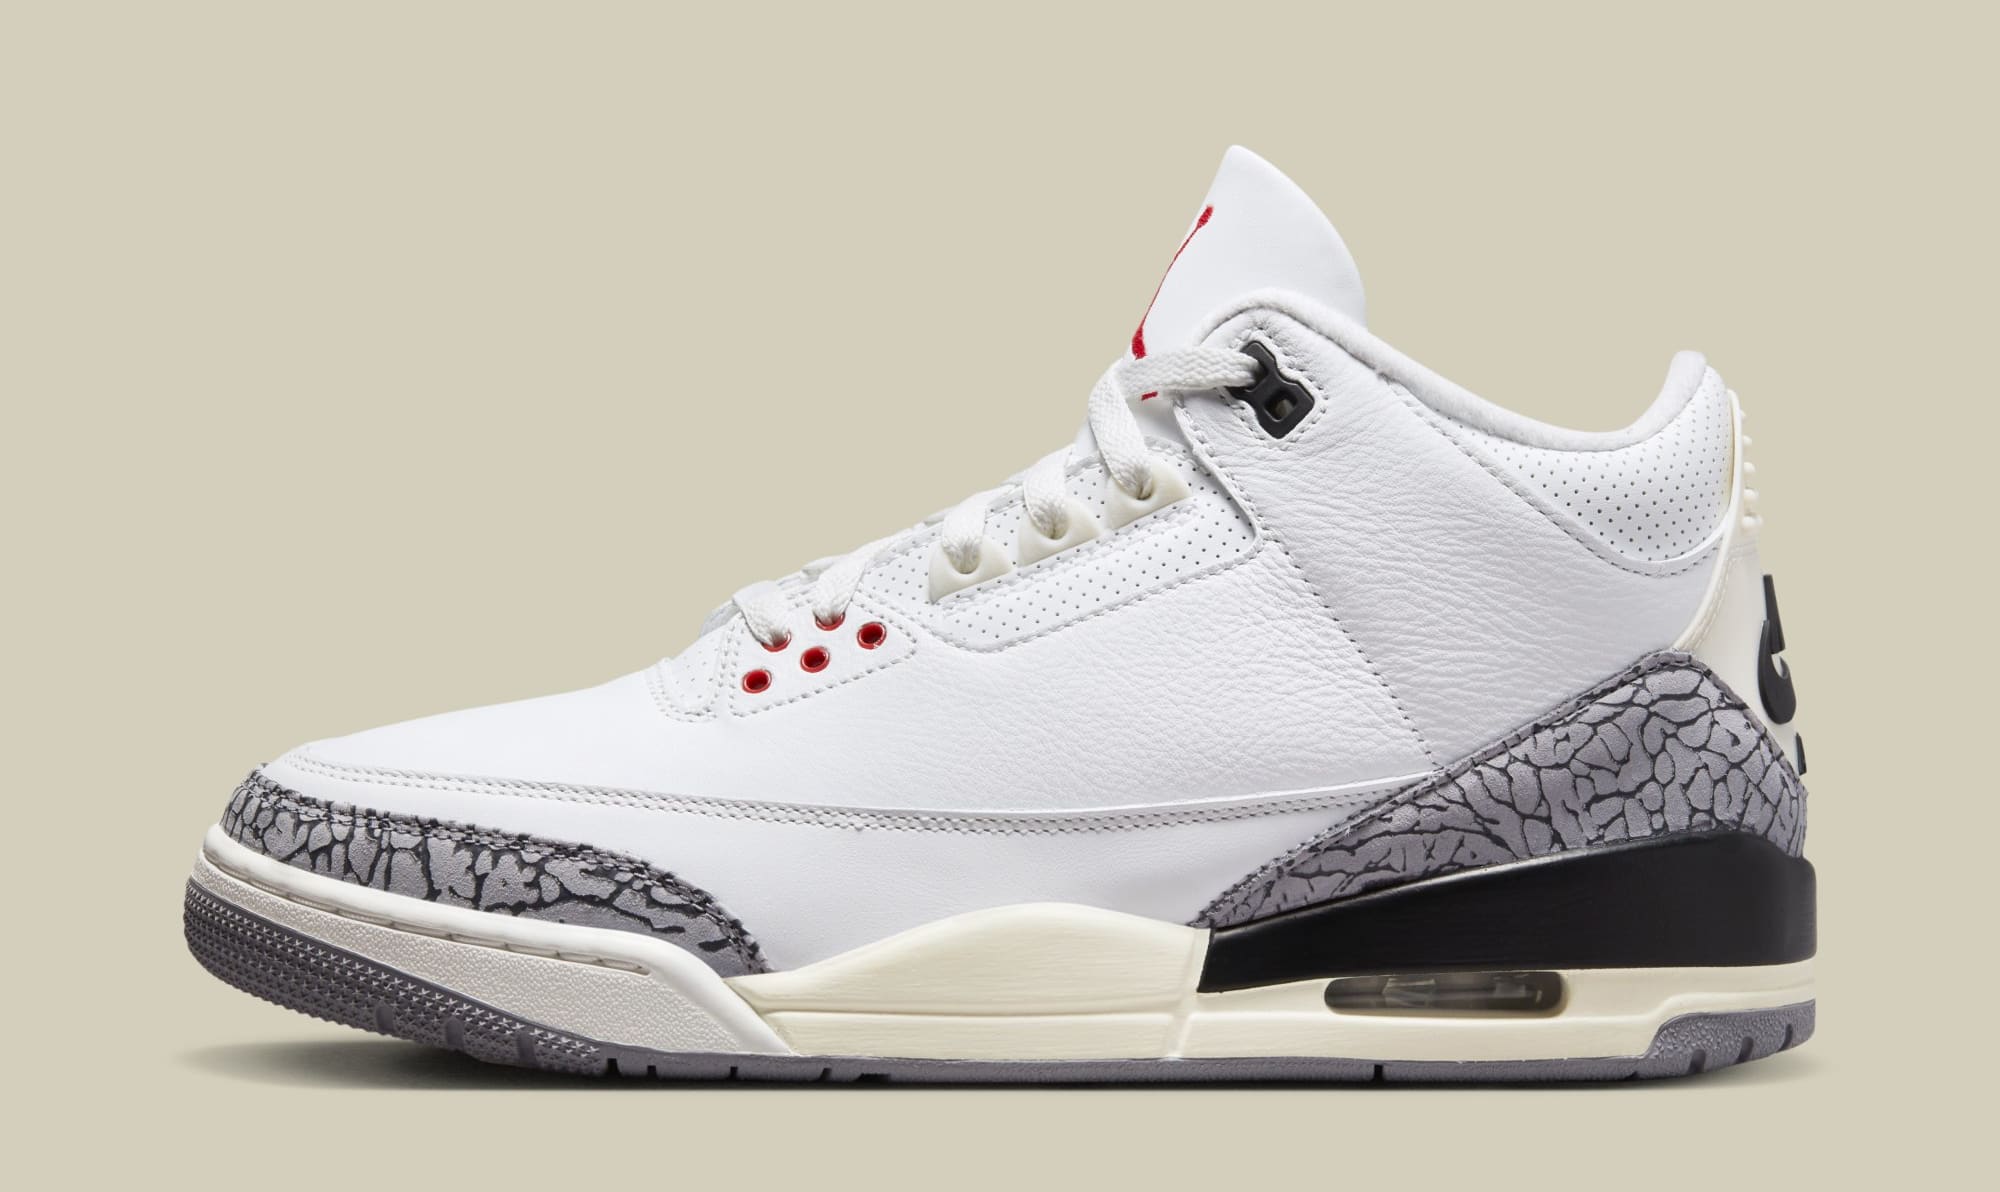 Air Jordan 3 'White/Cement' Remastered DN3707-100 (Lateral)